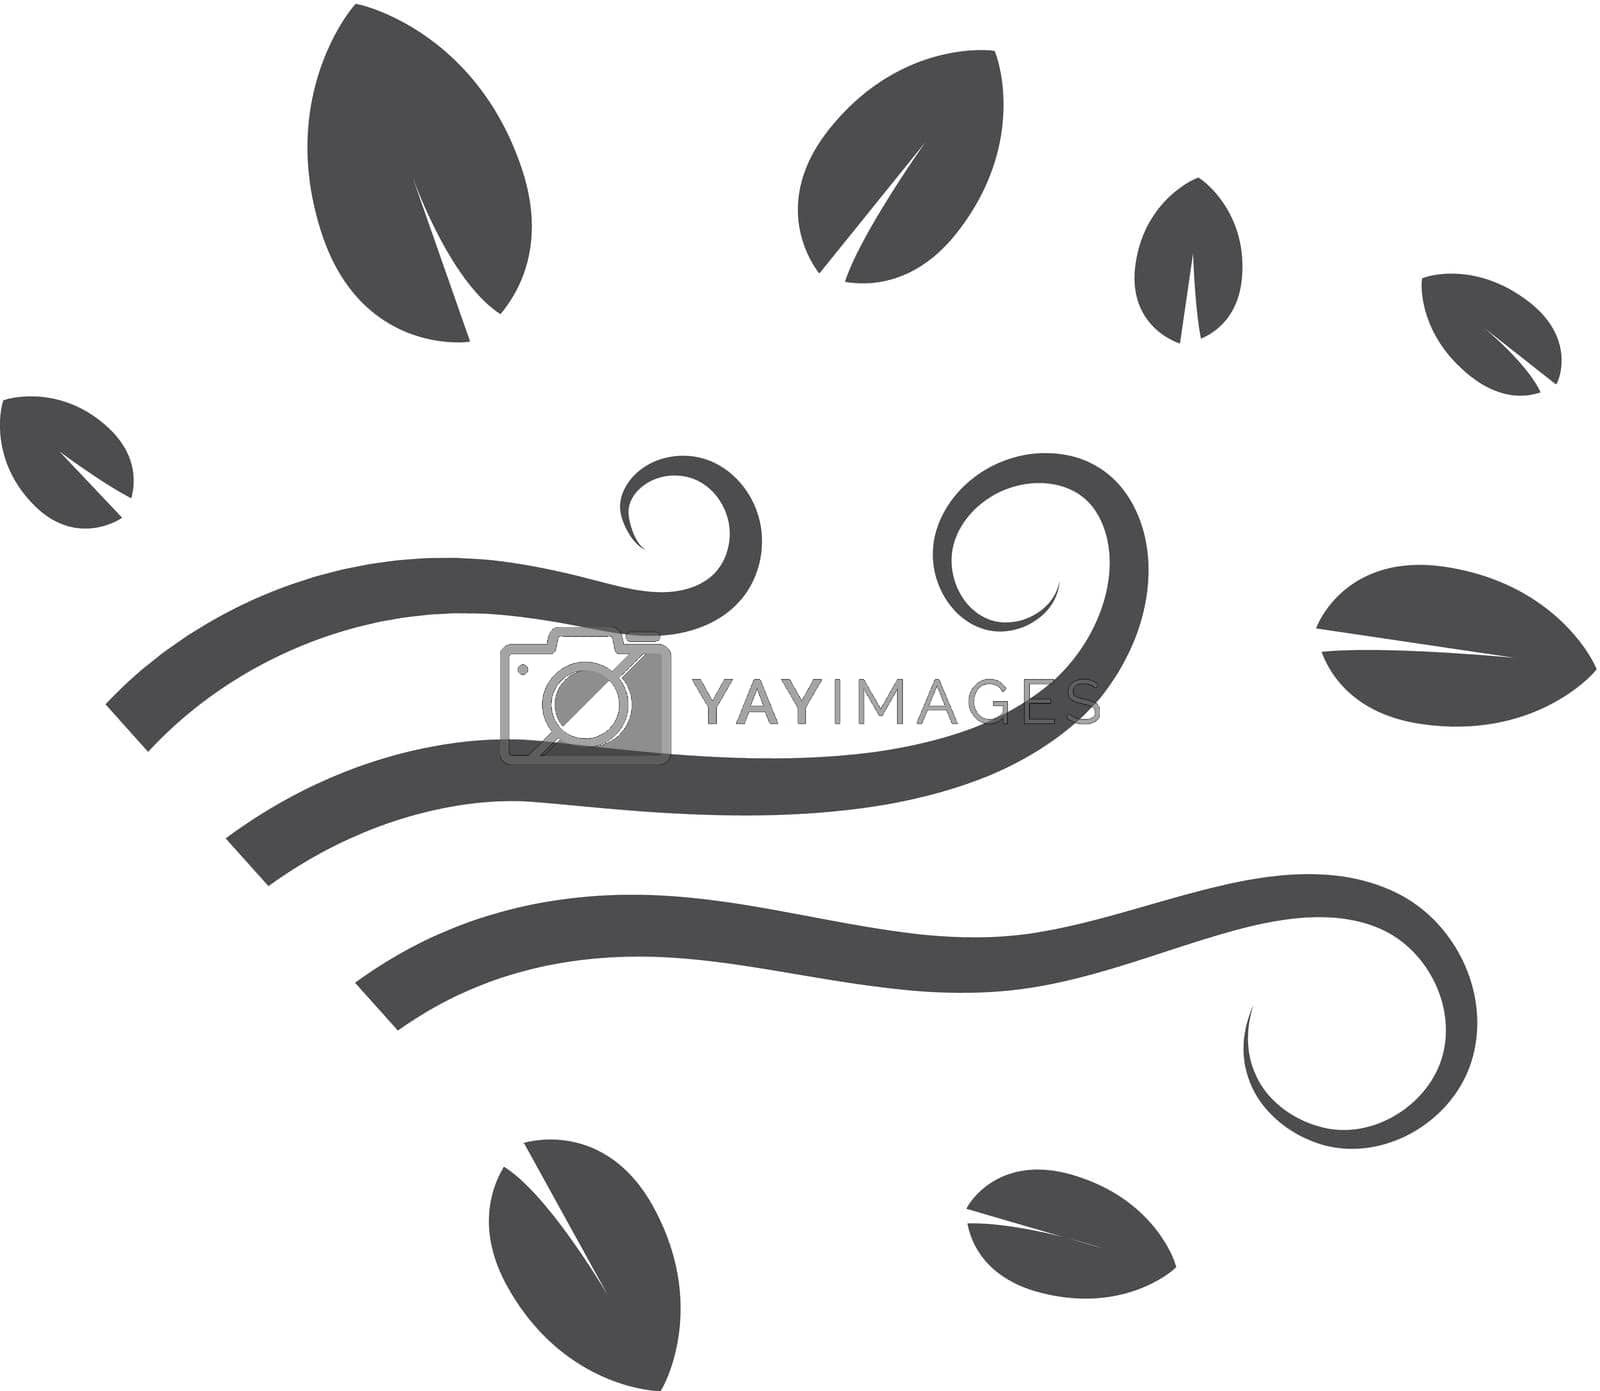 Royalty free image of Outline Icon - Grape by puruan